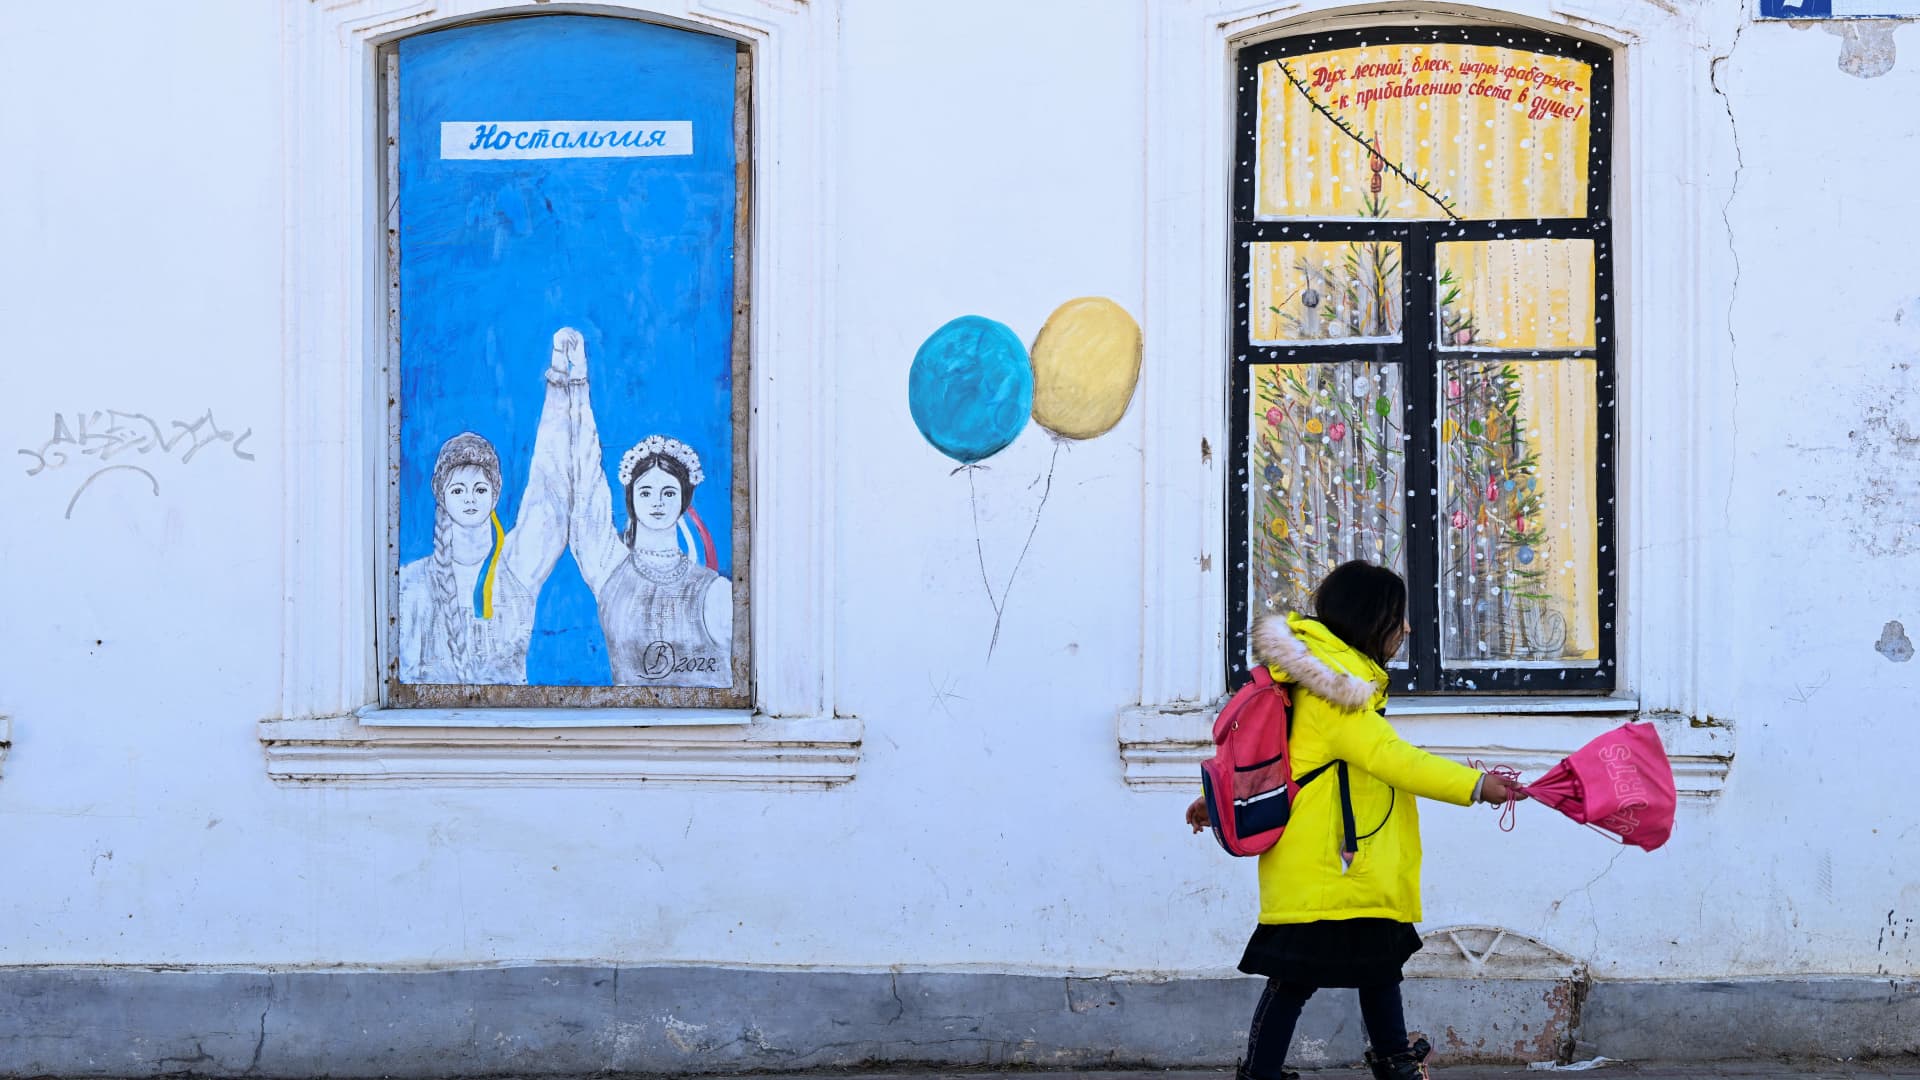 A child walks past by a graffiti made by the artist Vladimir Ovchinnikov in Borovsk, some 100kms south-west of Moscow, on April 14, 2022. Retired engineer Vladimir Ovchinnikov has spent decades painting murals on buildings in and around his small town south of Moscow. But since the outbreak of Russia's conflict with Ukraine, the 84-year-old has found that some of his art is not welcome.